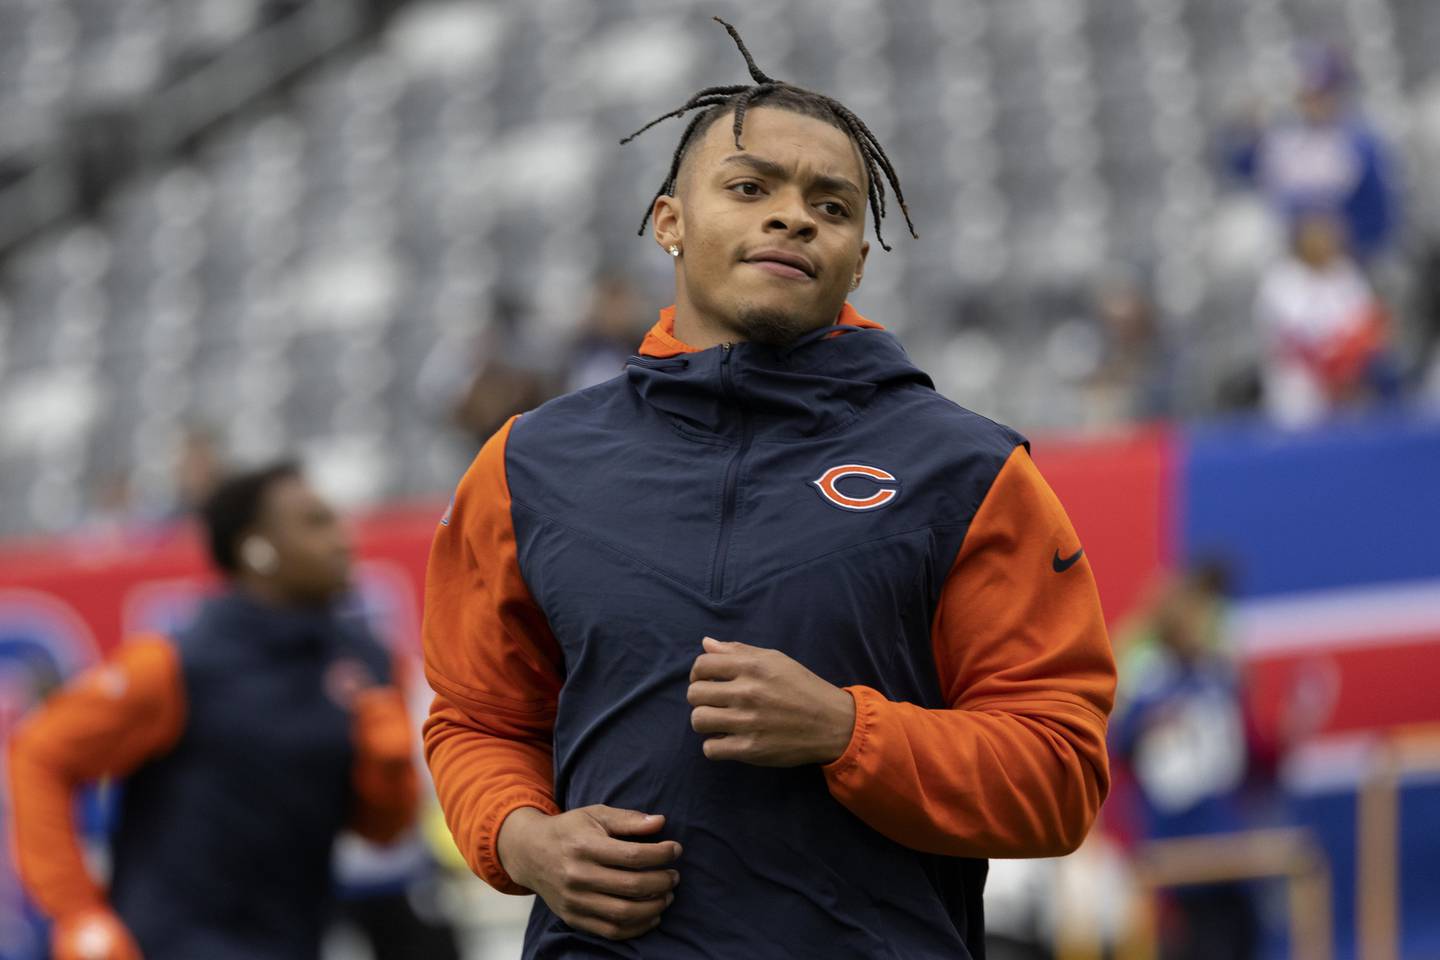 Bears quarterback Justin Fields warms up before the game against the Giants on Oct. 12, 2022.